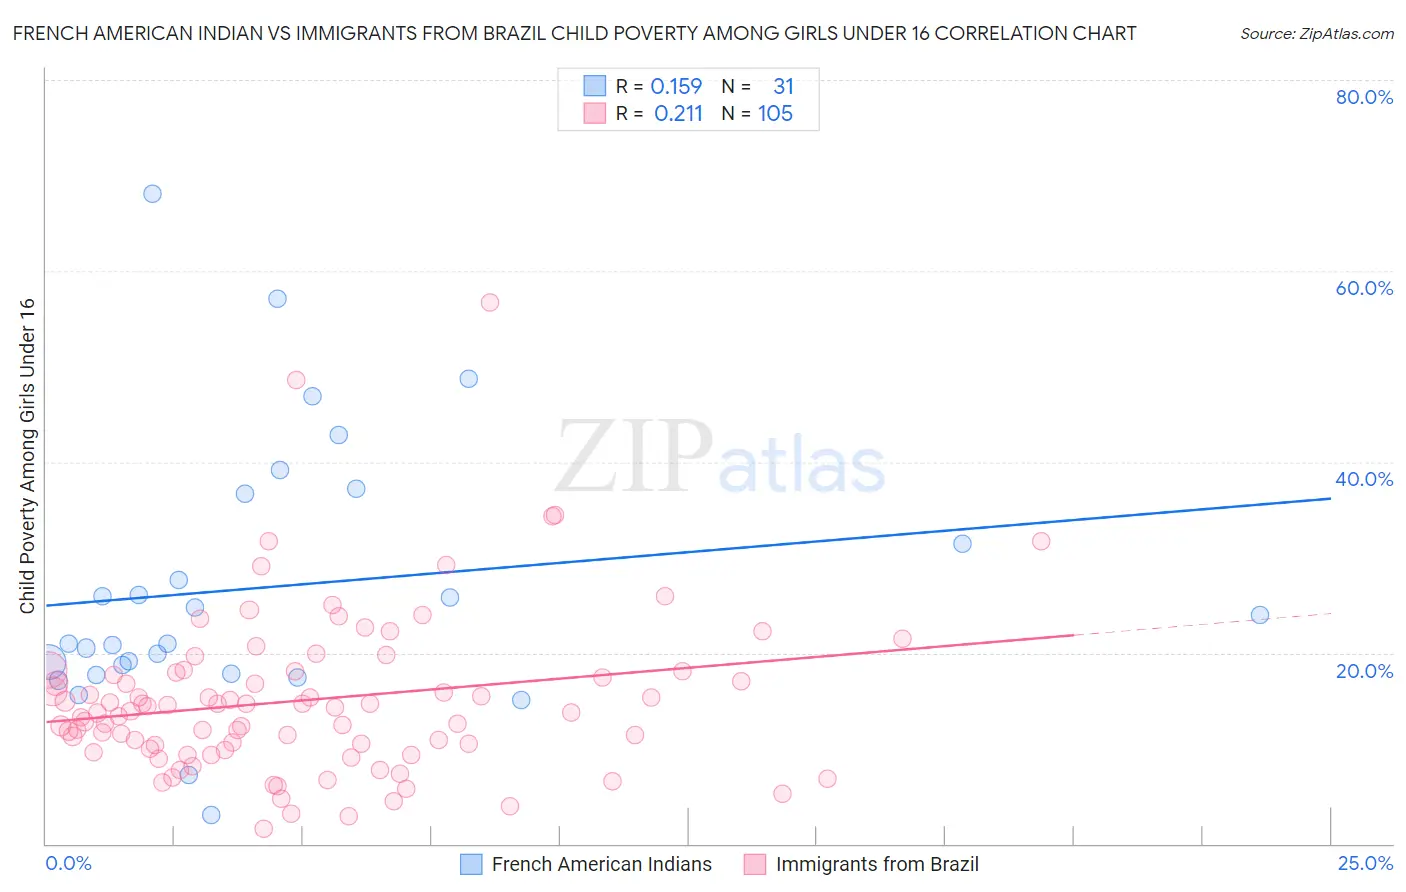 French American Indian vs Immigrants from Brazil Child Poverty Among Girls Under 16